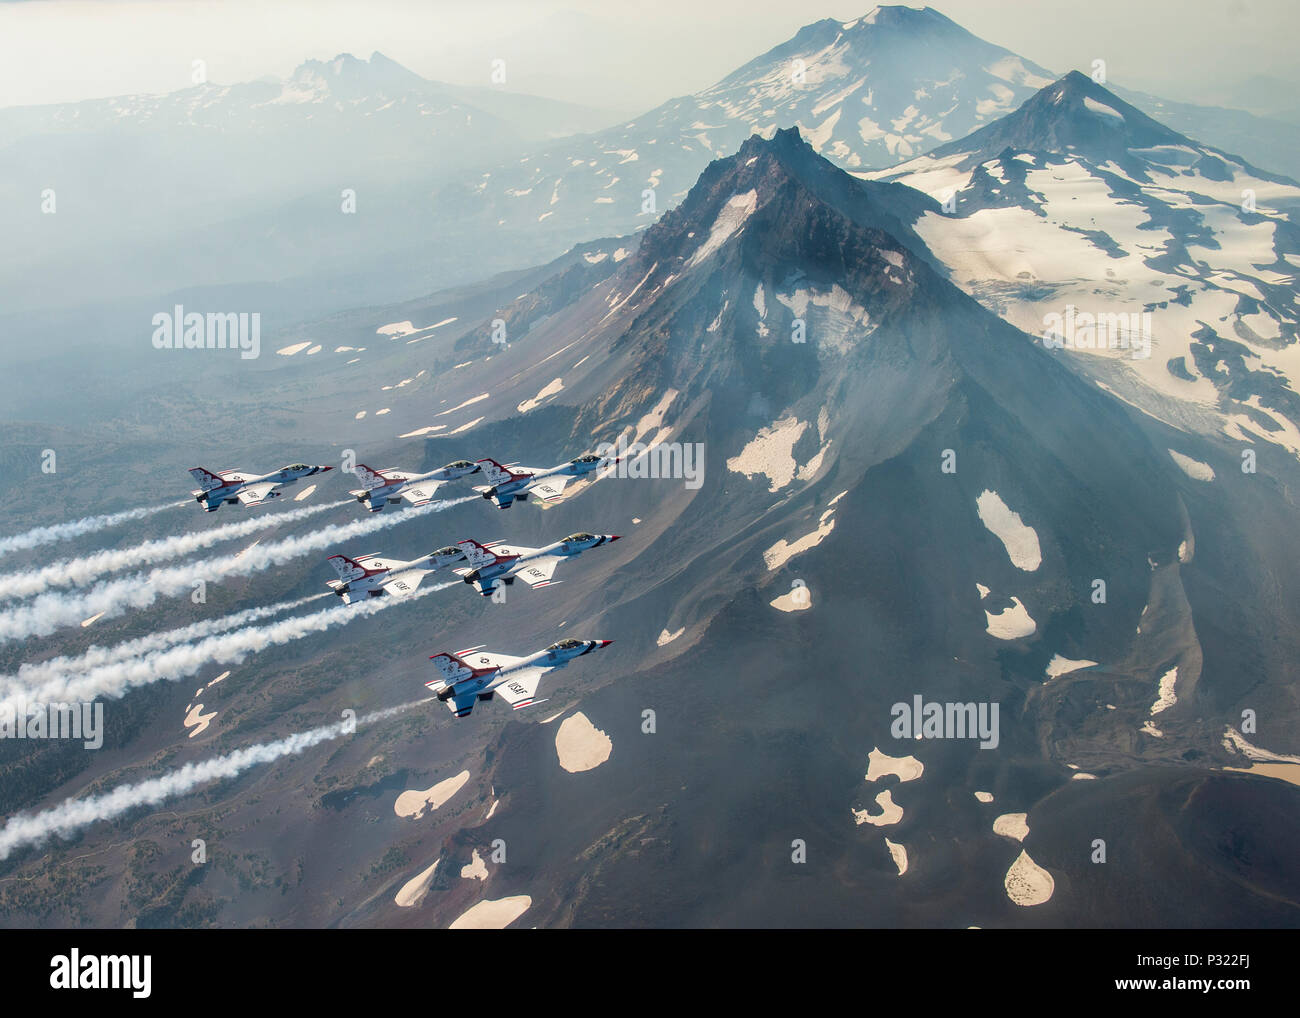 The Thunderbirds pilots fly over Three Sisters volcanic peaks in Oregon during their return to Nellis Air Force Base, Nev., August 29, 2016. The Thunderbirds performed at the Airshow and Warrior Expo at Joint Base Lewis-McChord, Wash., August 27-28. (U.S. Air Force photo/Tech. Sgt. Christopher Boitz) Stock Photo